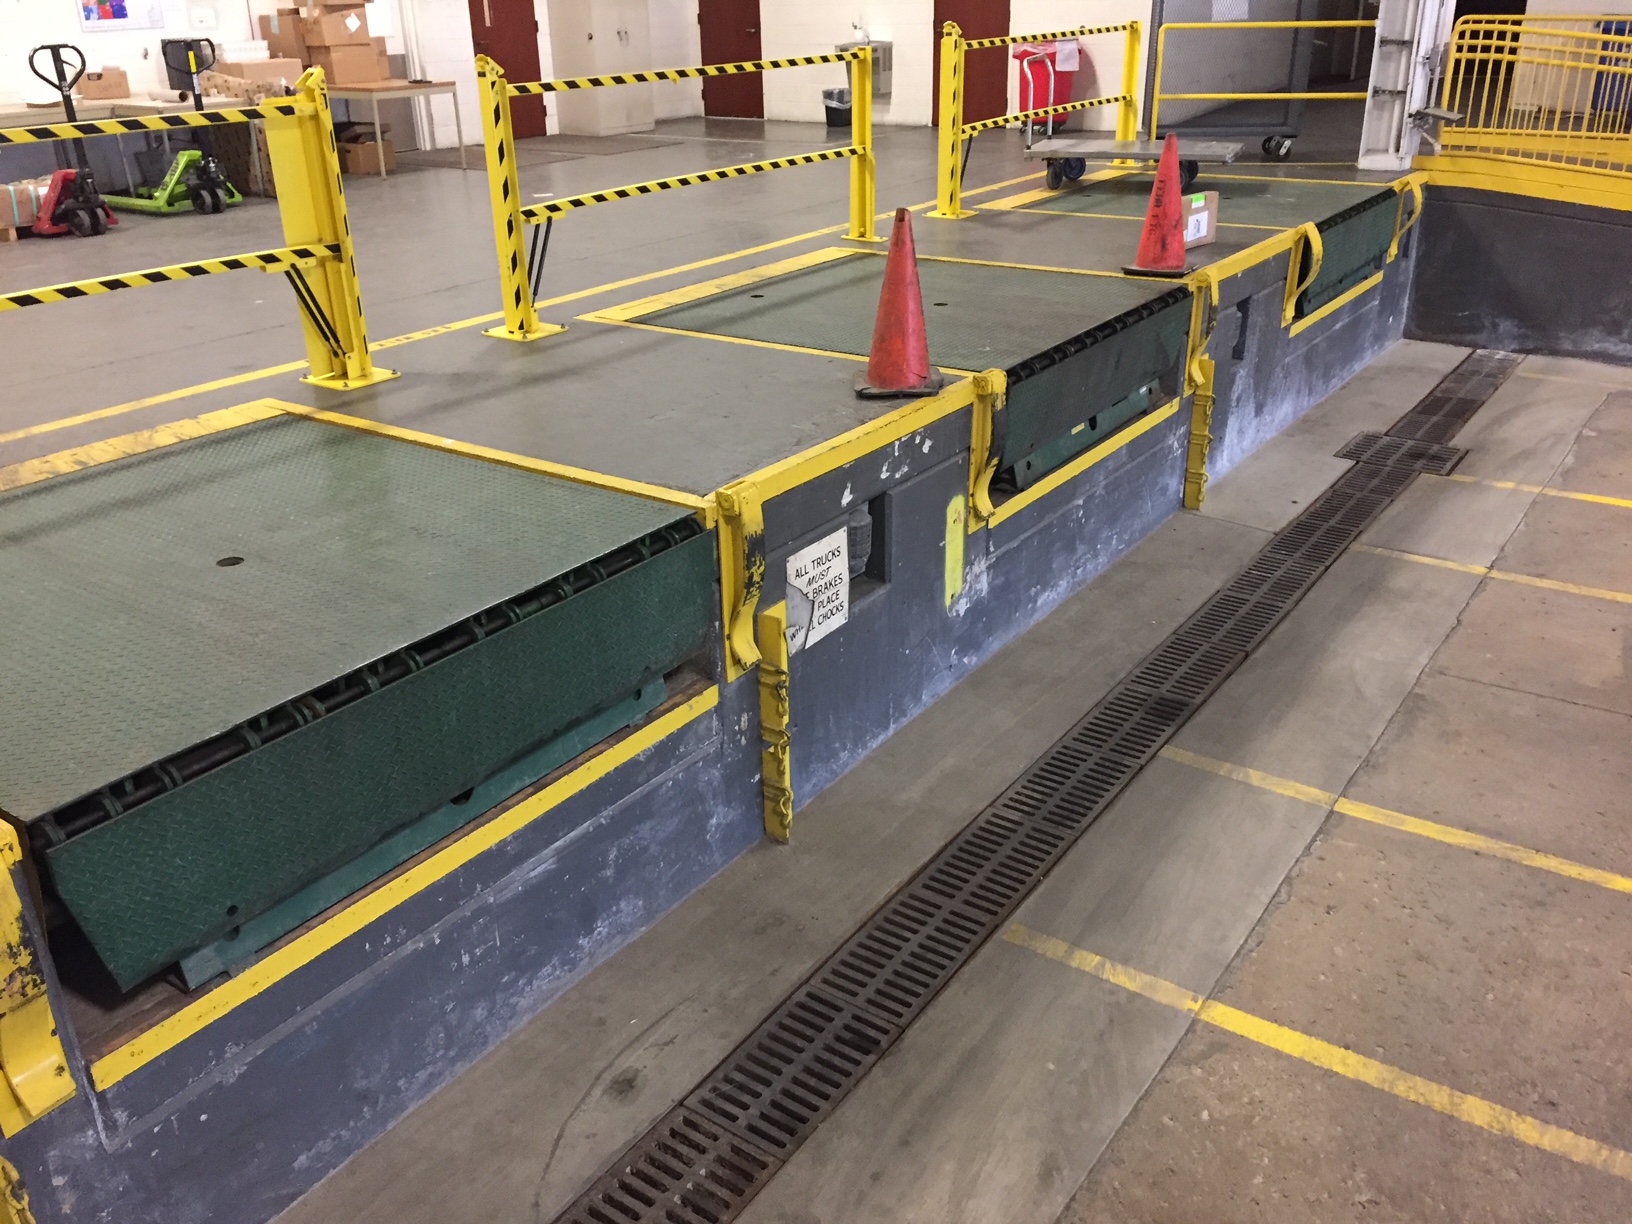 A loading dock with orange safety cones and yellow barriers.